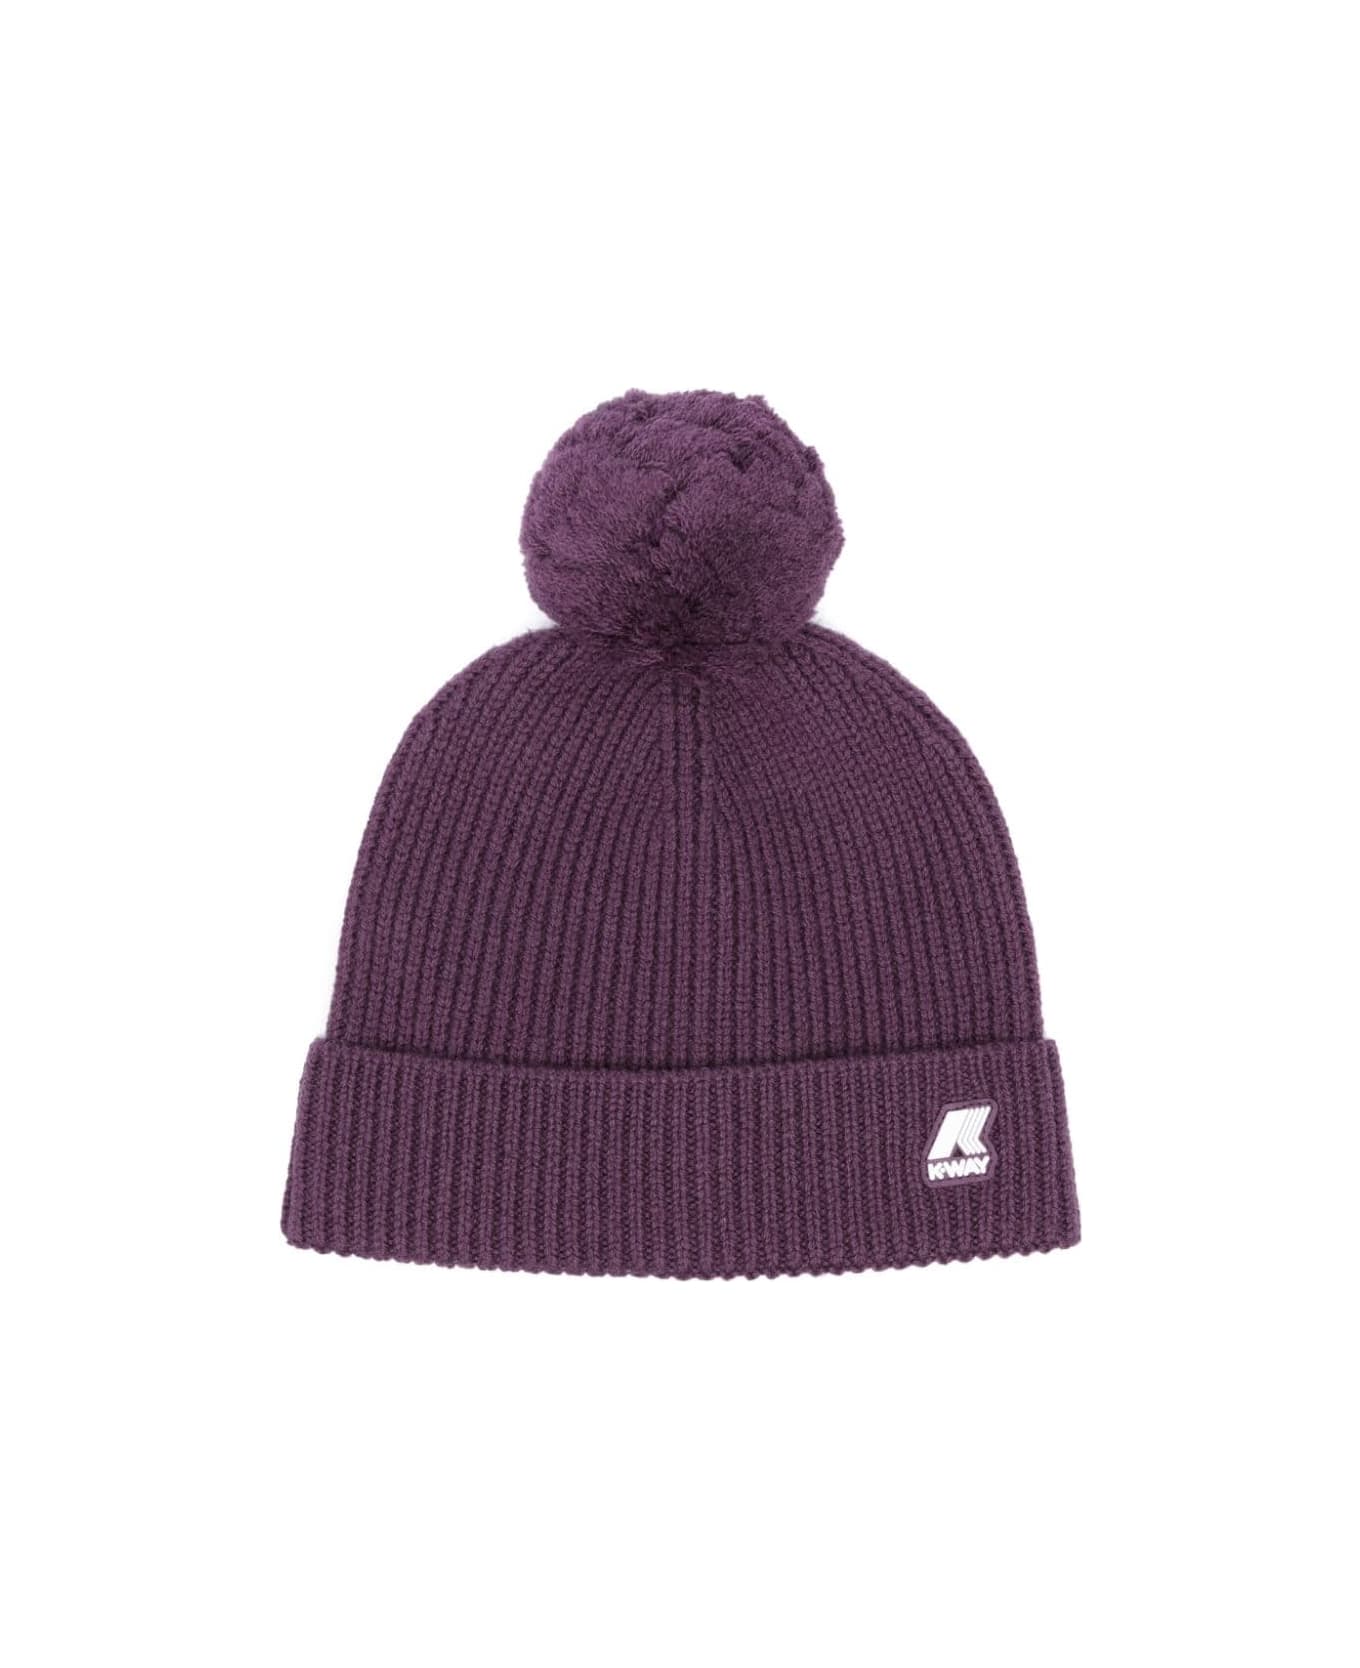 K-Way Beanie With Logo - Violet アクセサリー＆ギフト